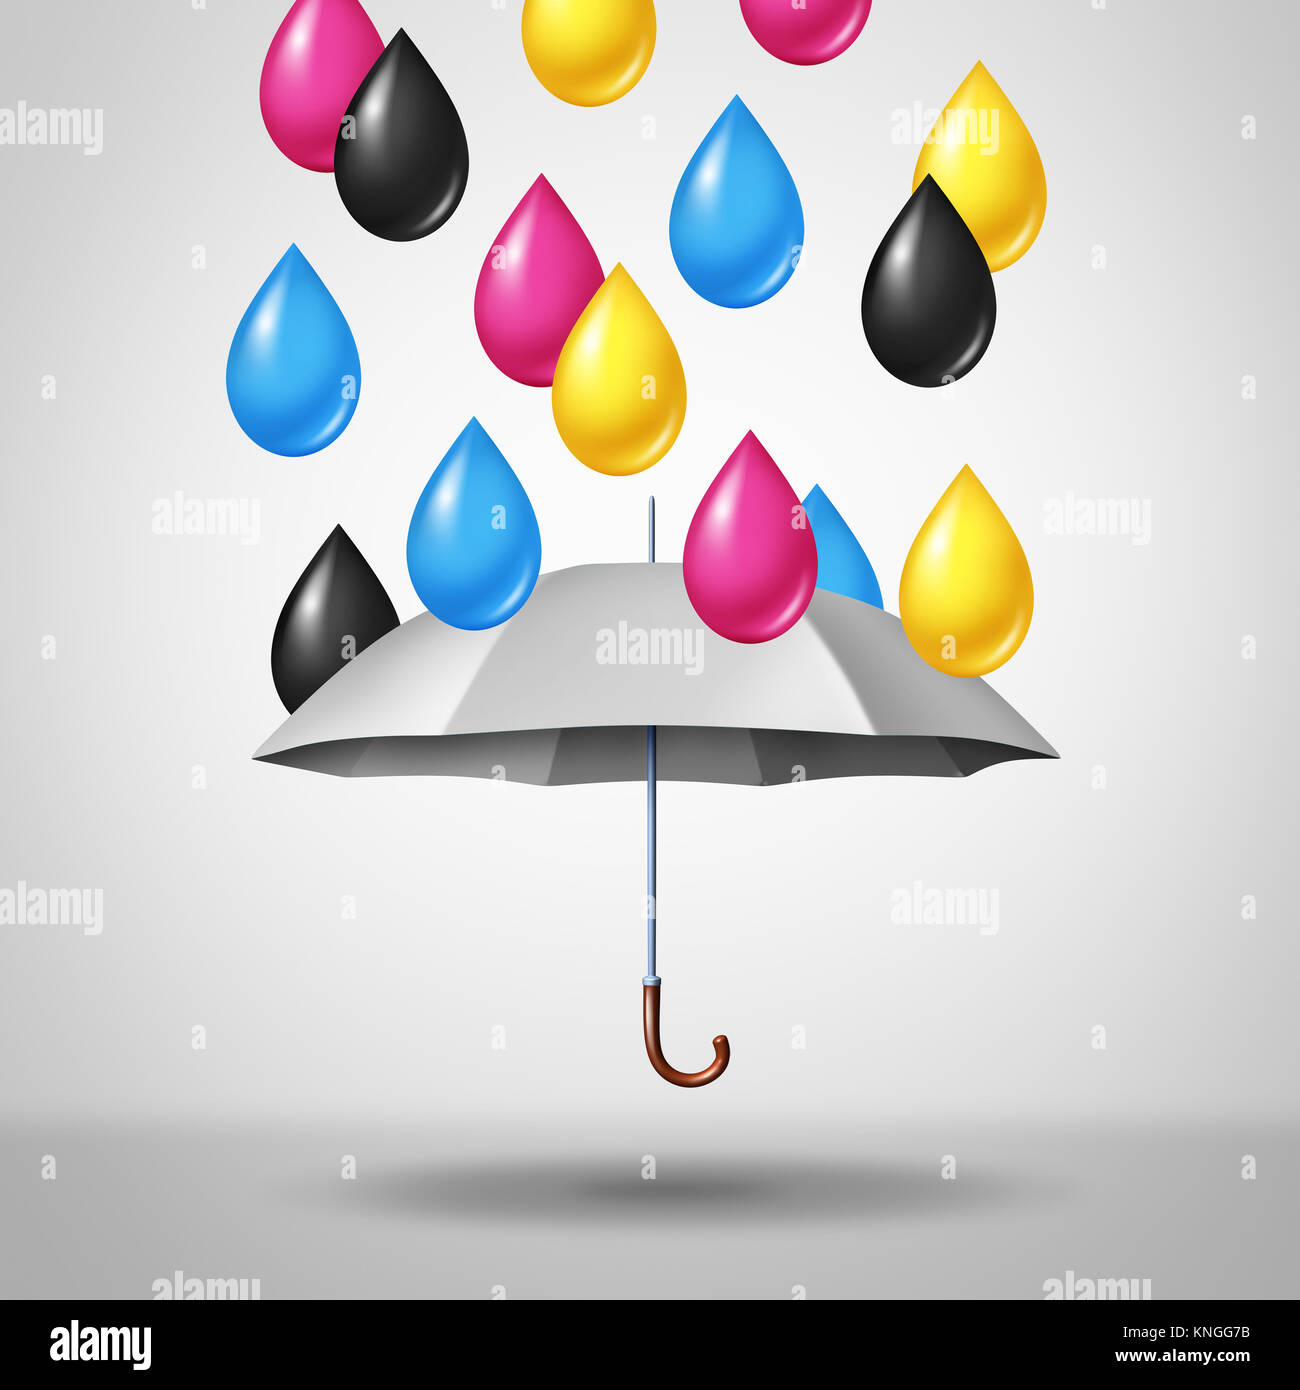 CMYK color concept as magenta cyan yellow and black raining down as drops on a white umbrella with 3D illustration elements. Stock Photo